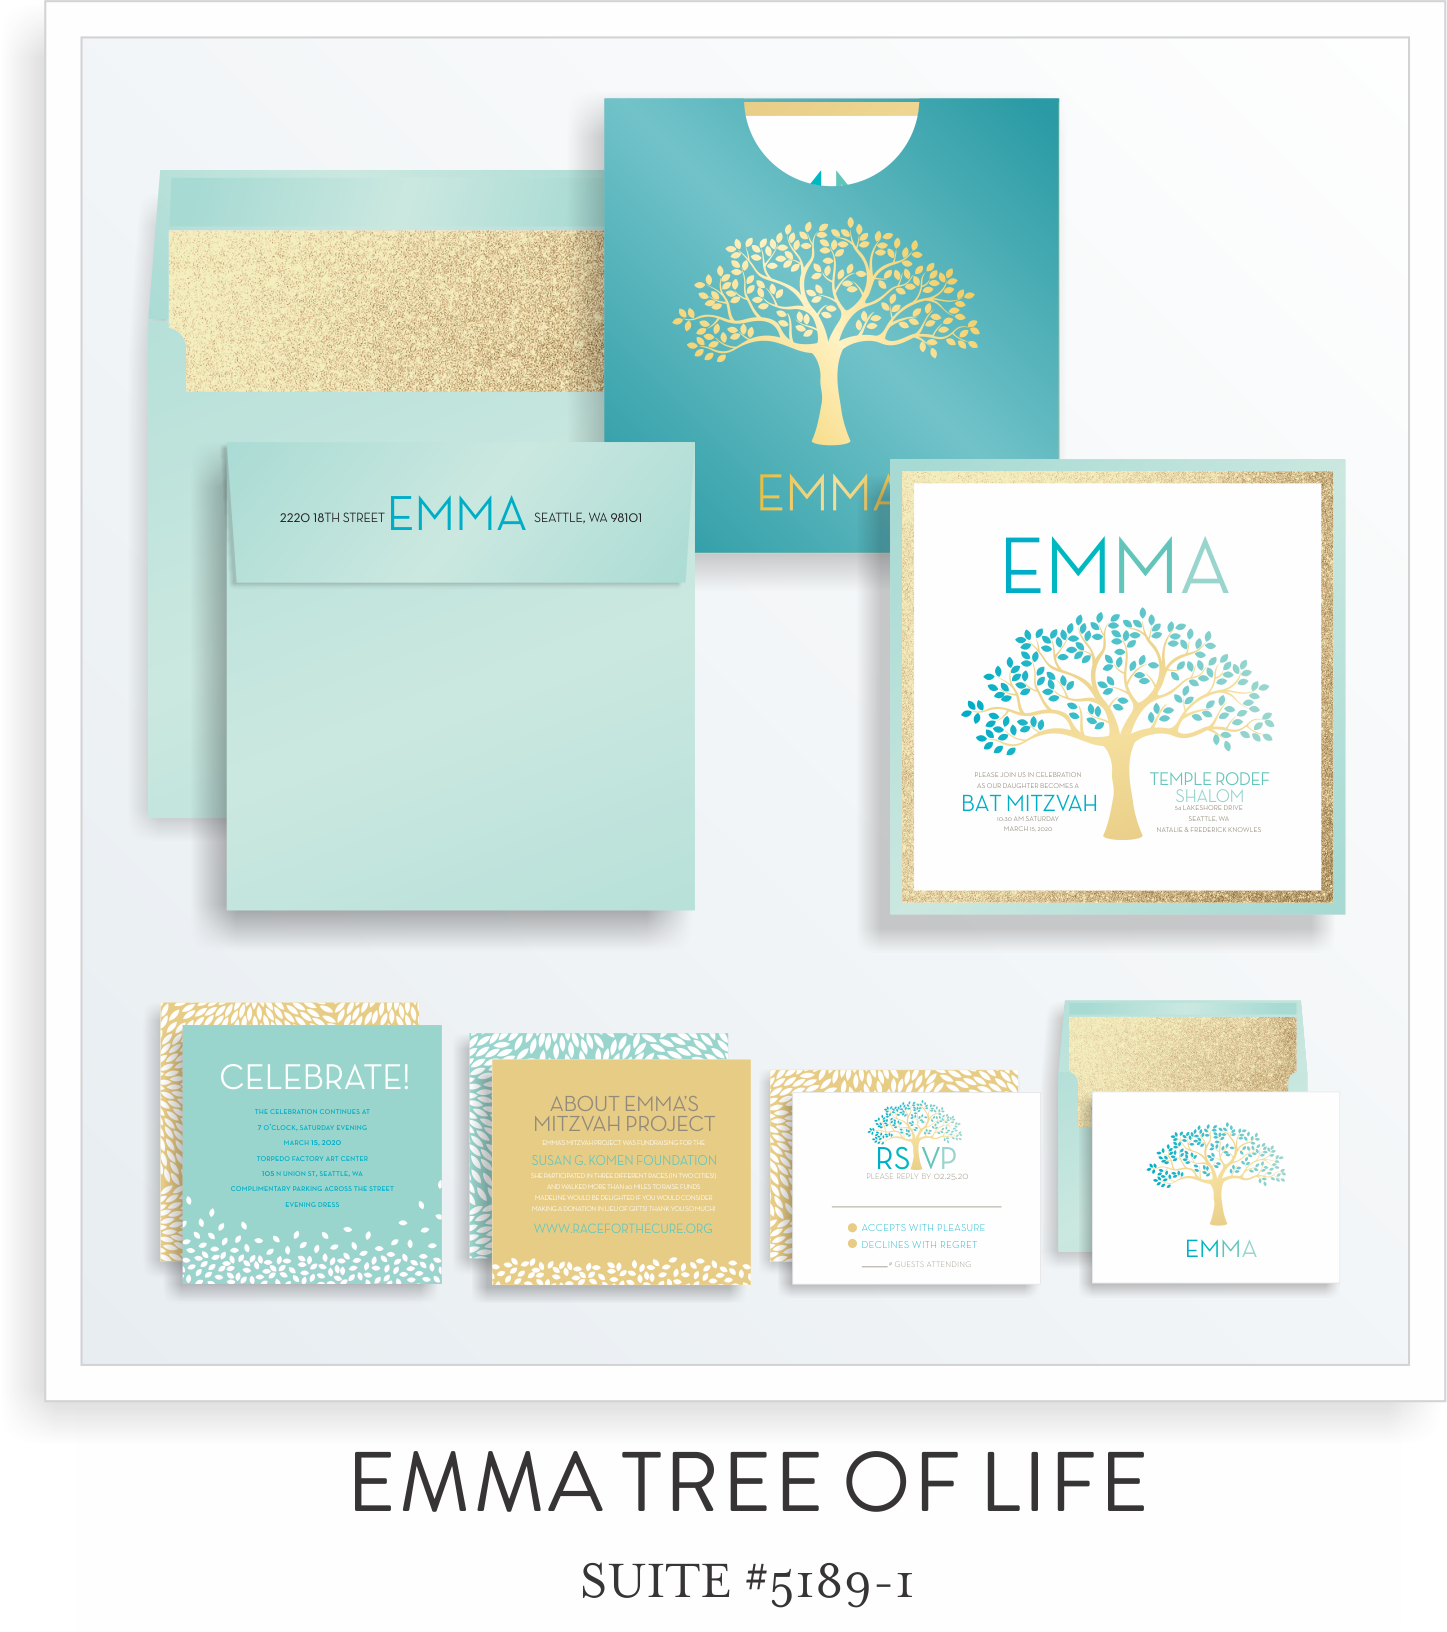 5189-1 EMMA TREE OF LIFE SUITE THUMB.png